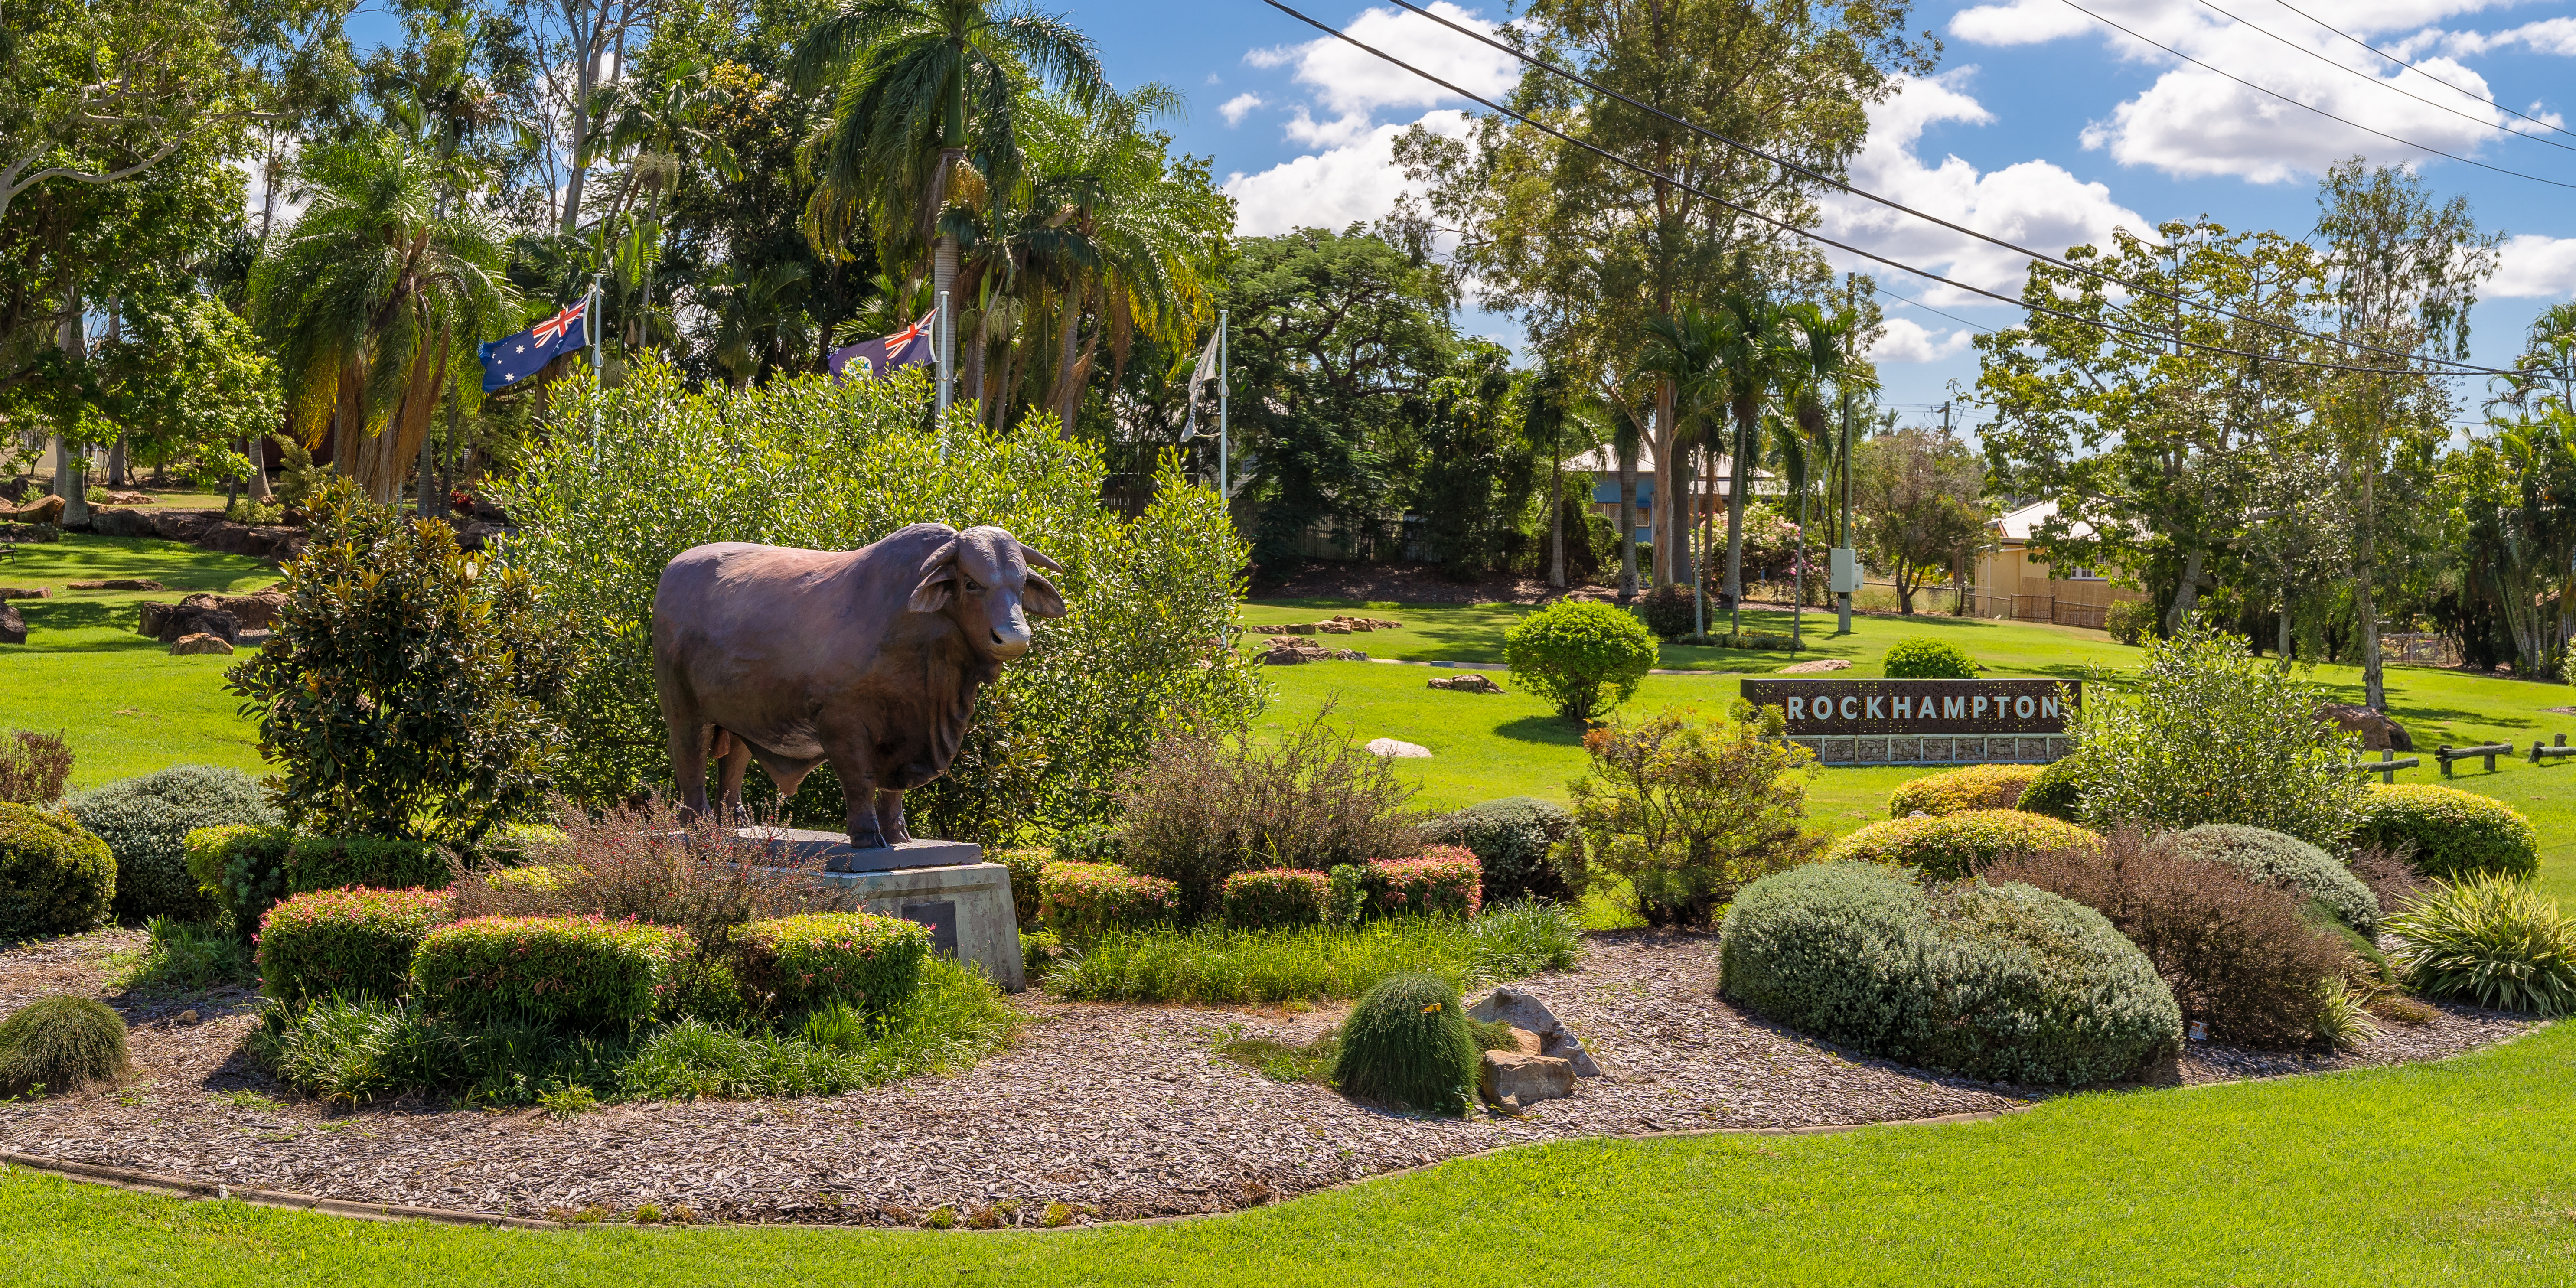 Bull Statue in a beautifully landscaped garden.